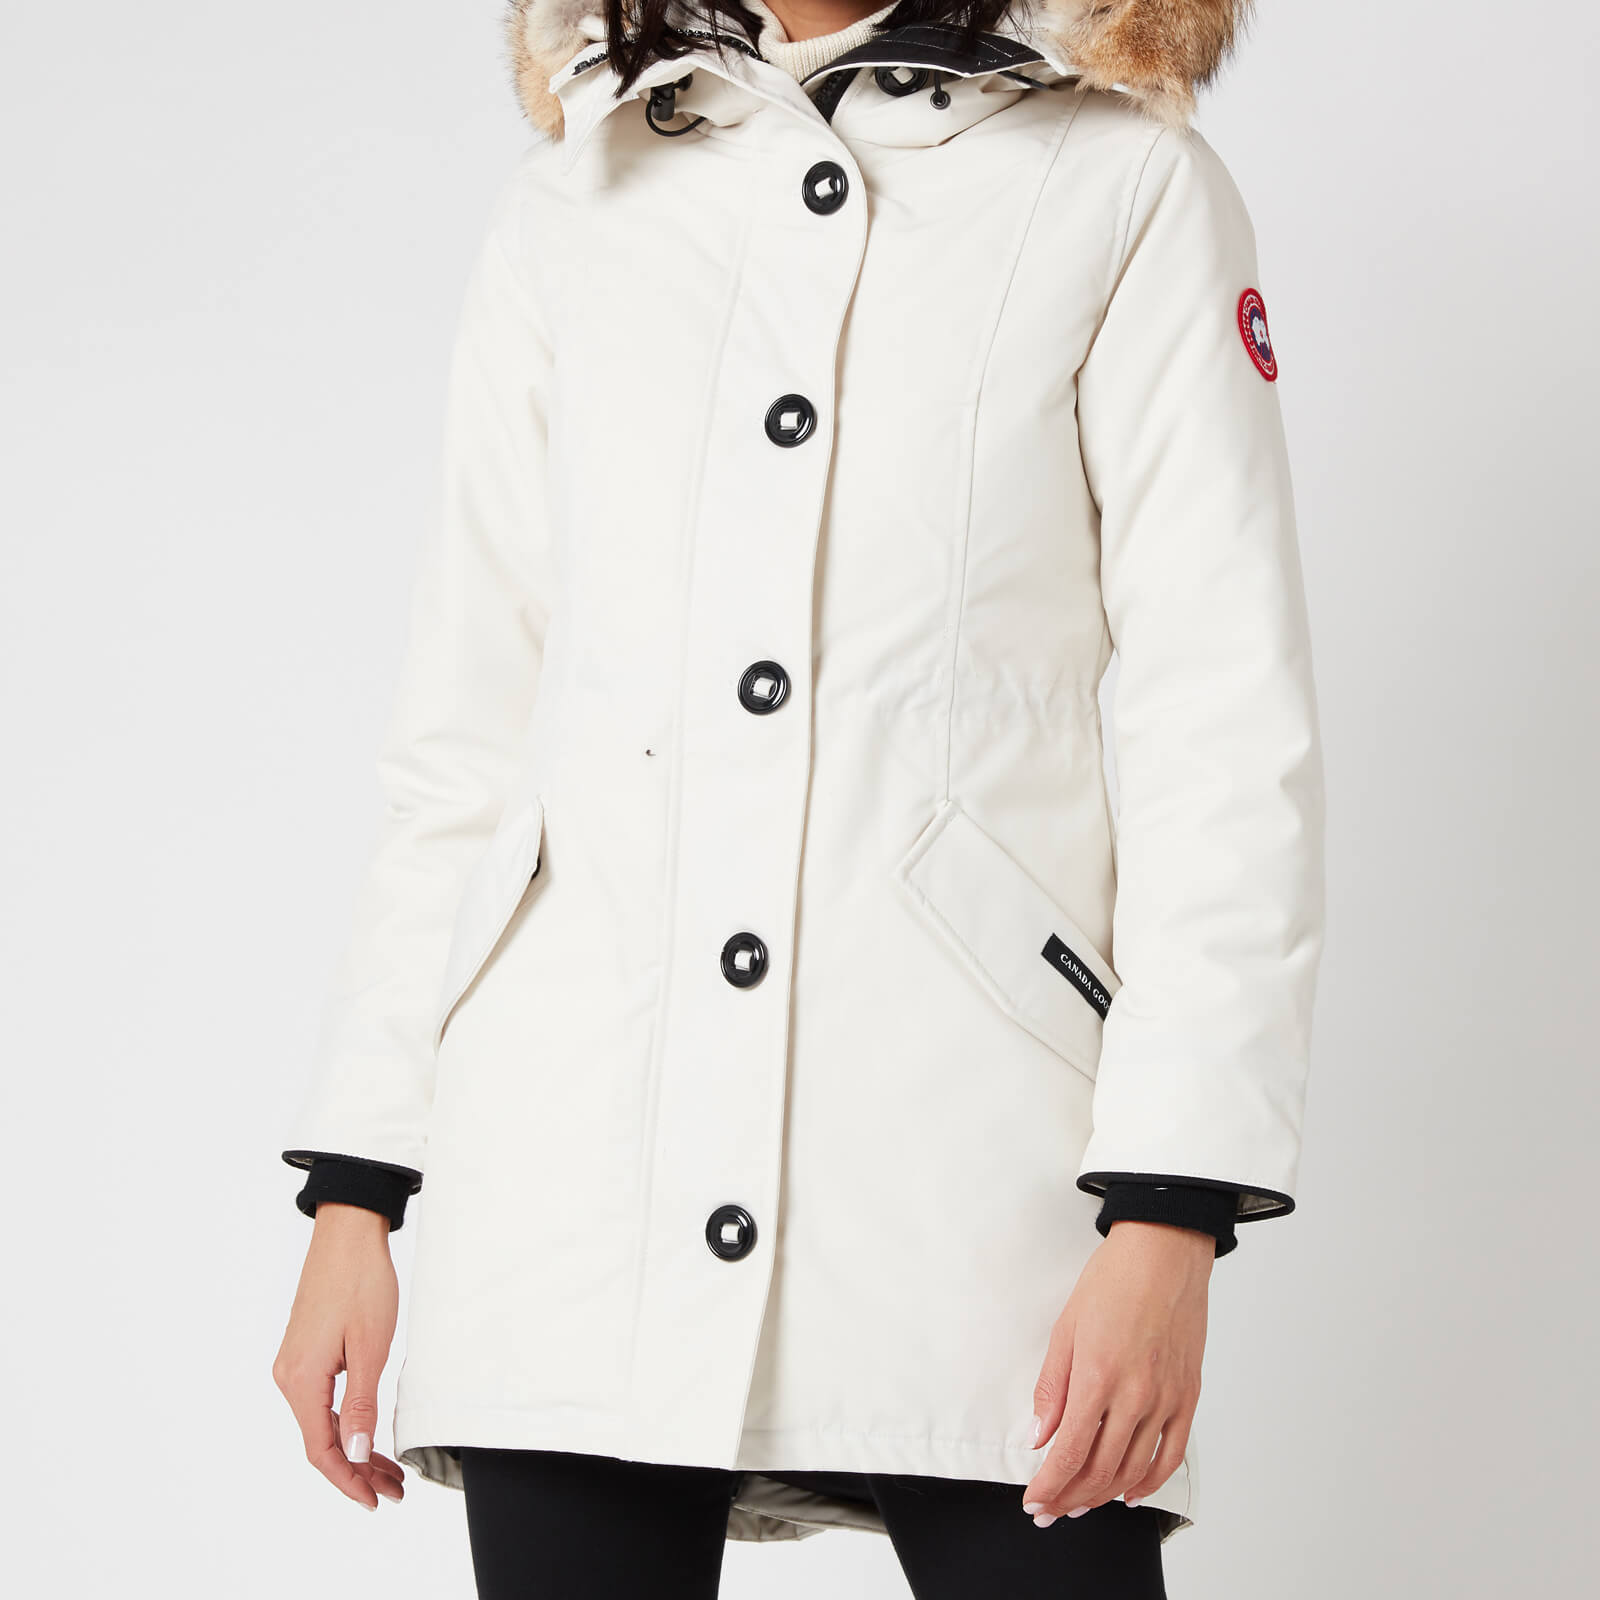 Canada Goose Women's Rossclair Parka - Early Light - XS